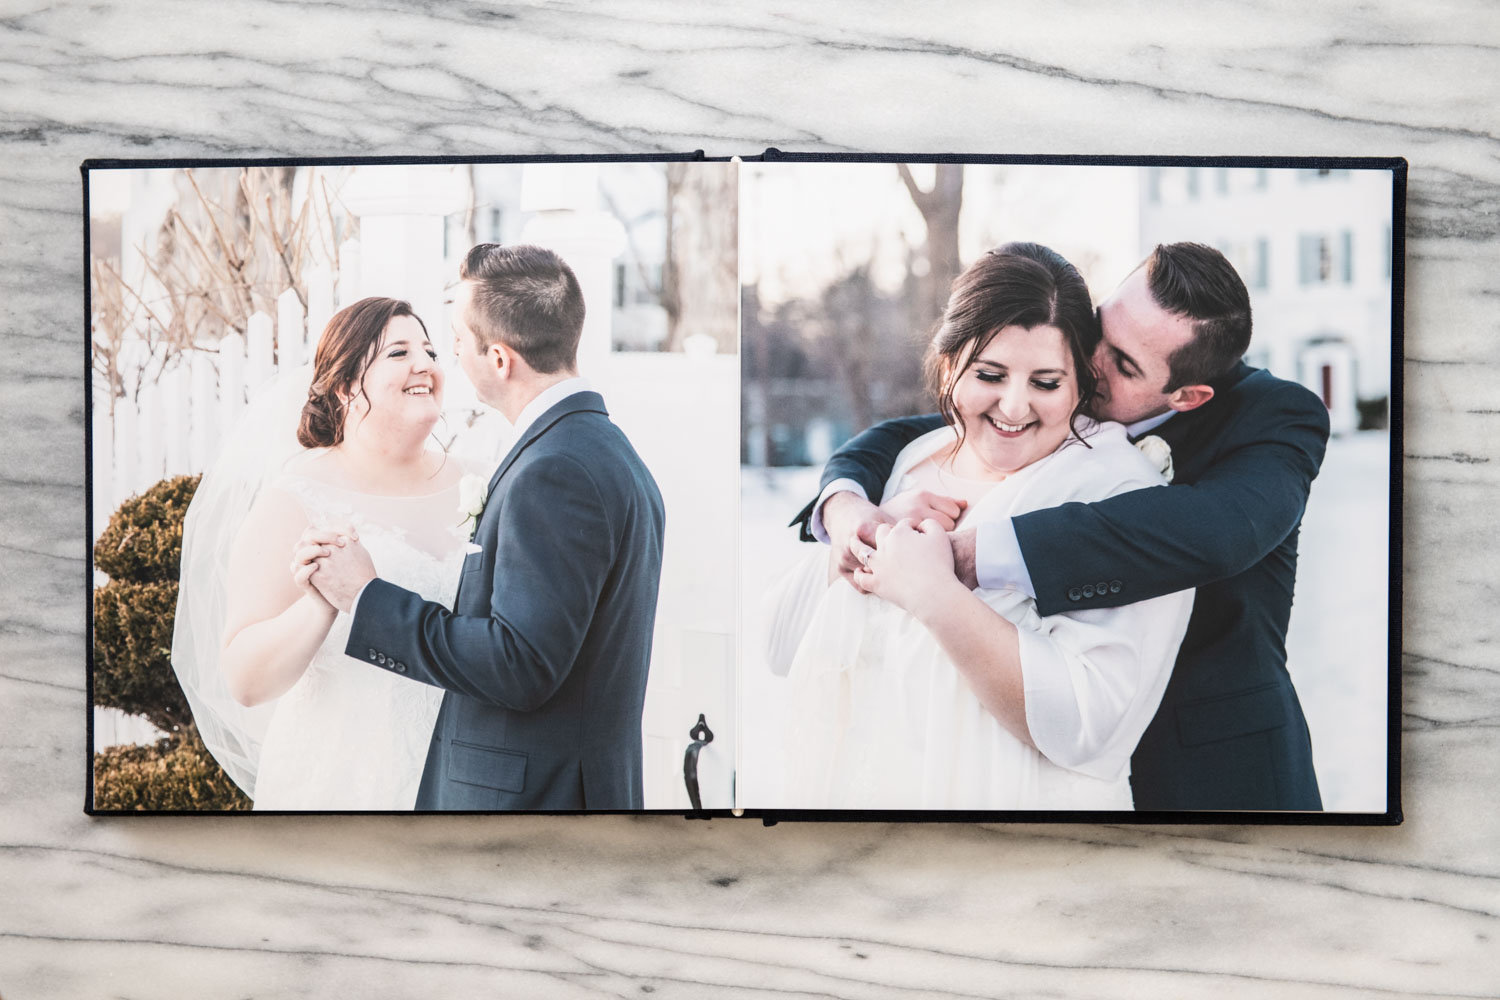 Katelyn + Joe | St. Patrick's Day Topsfield Commons Spring Wedding | Boston and New England Wedding Photography Print Album with Cathedral Veil | Lorna Stell Photo